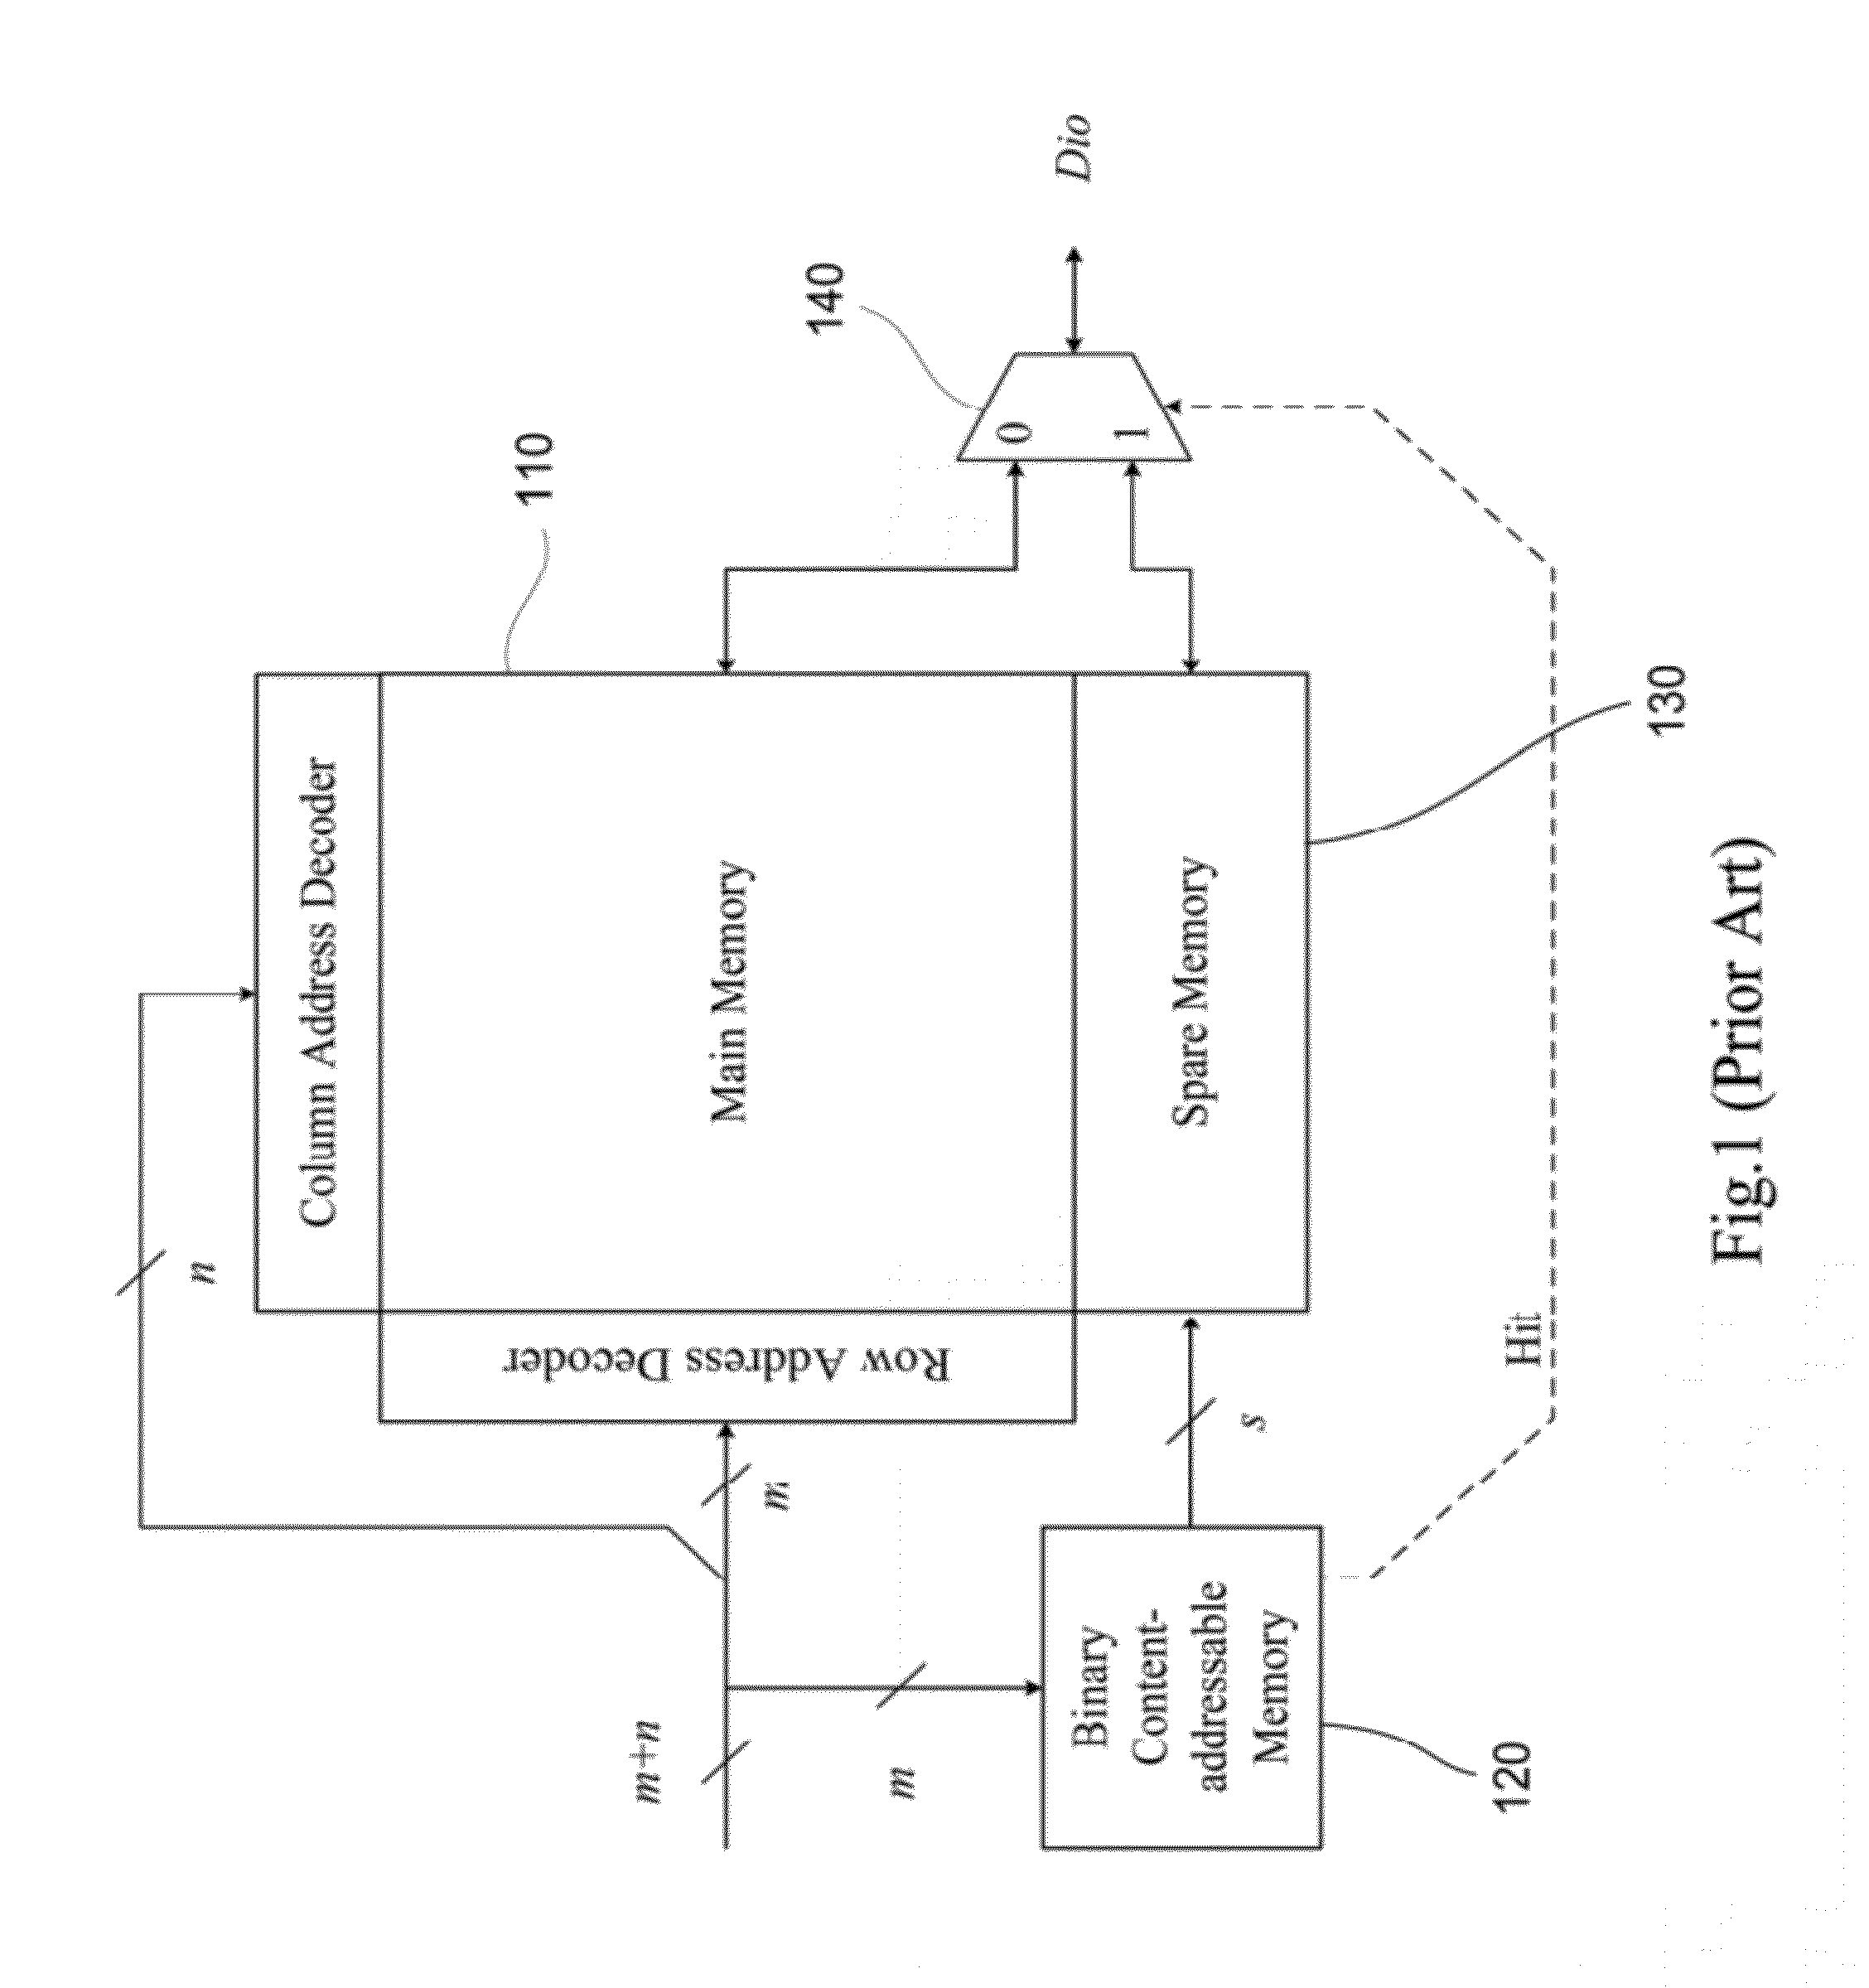 Memory address remapping architecture and repairing method thereof